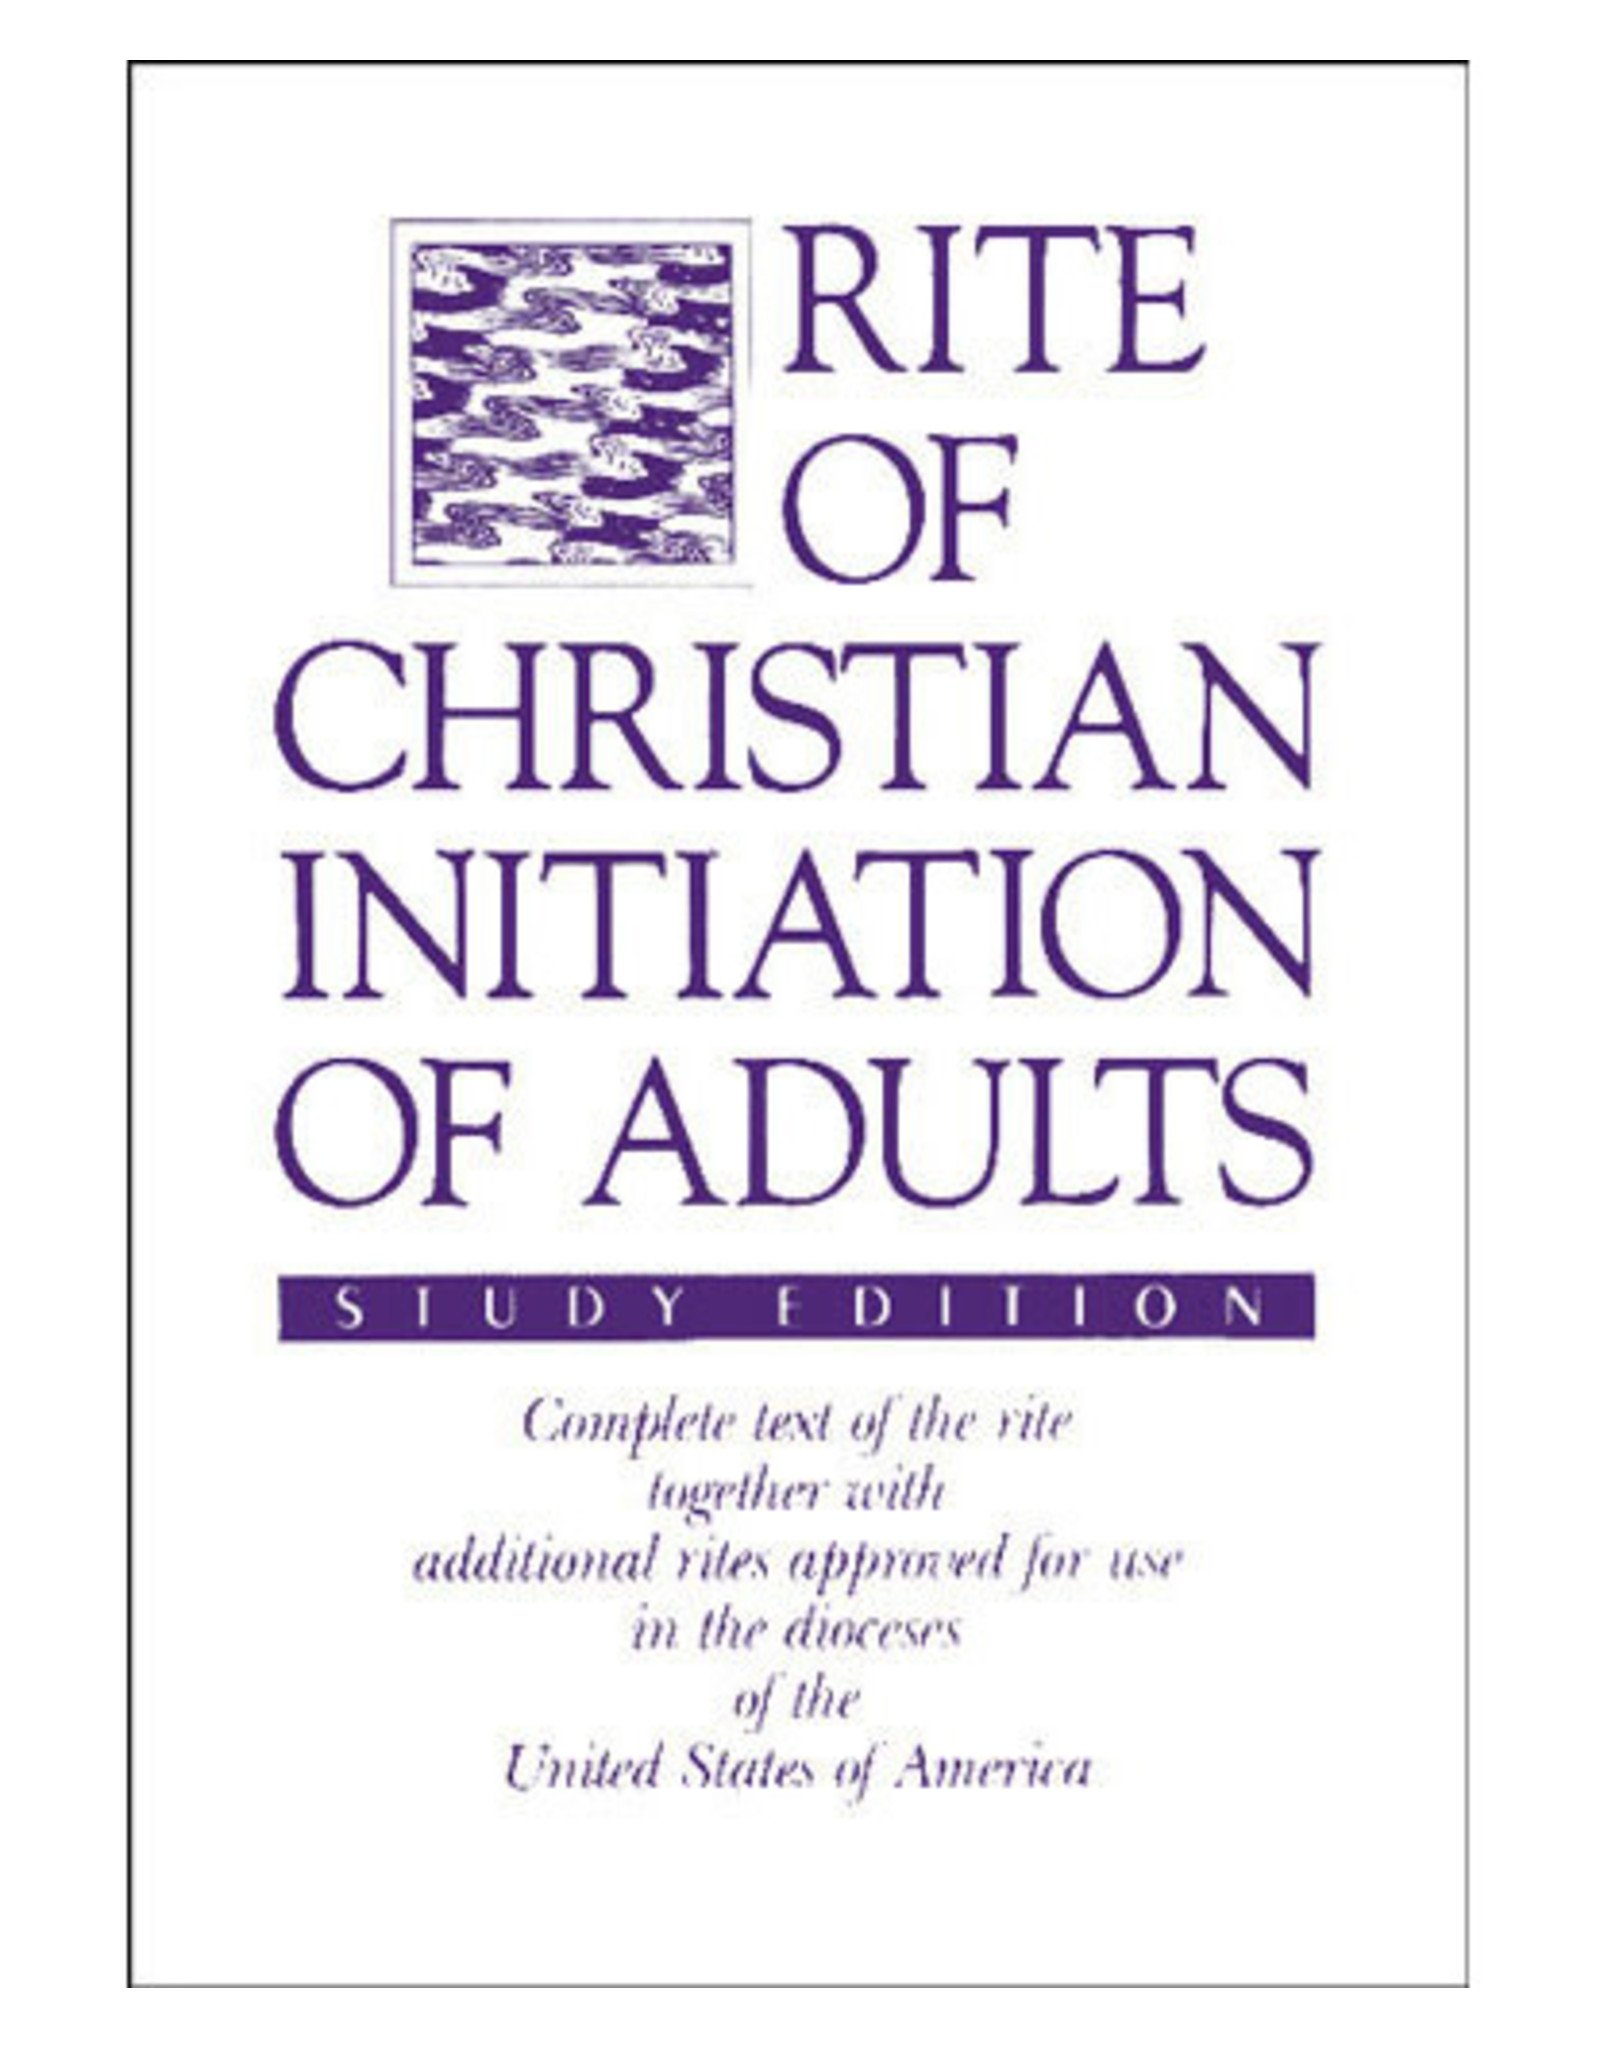 LTP (Liturgy Training Publications) RCIA (Rite of Christian Initiation of Adults) Study Edition